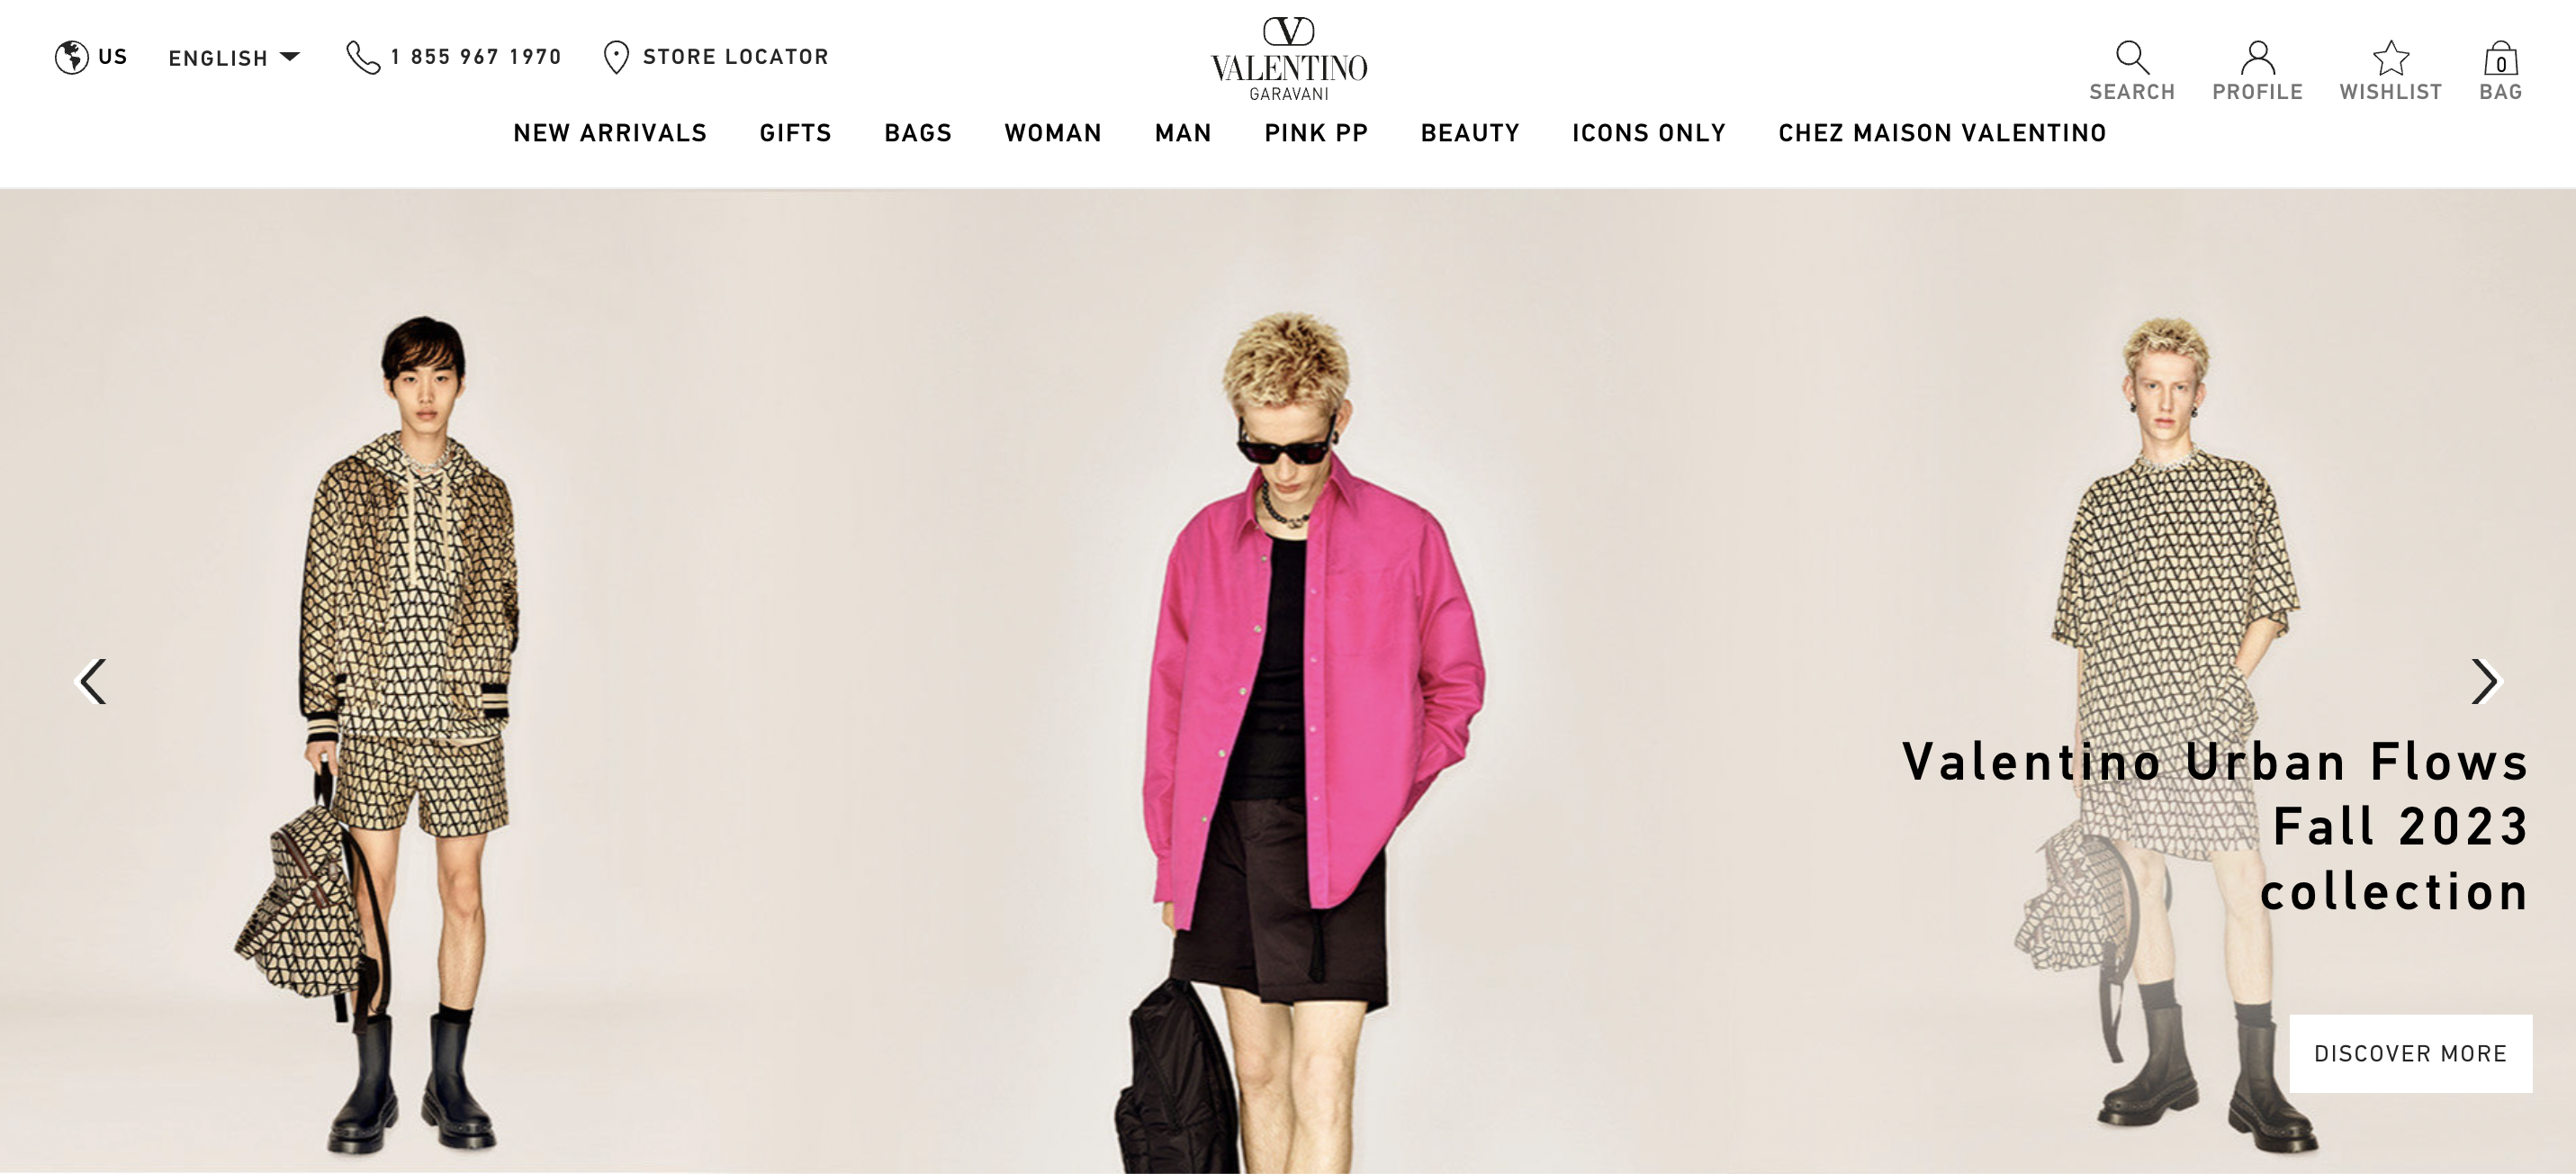 Valentino’s 2022 Revenue Increases by 15% YoY with a 40% Surge in Perfumes and Cosmetics Business